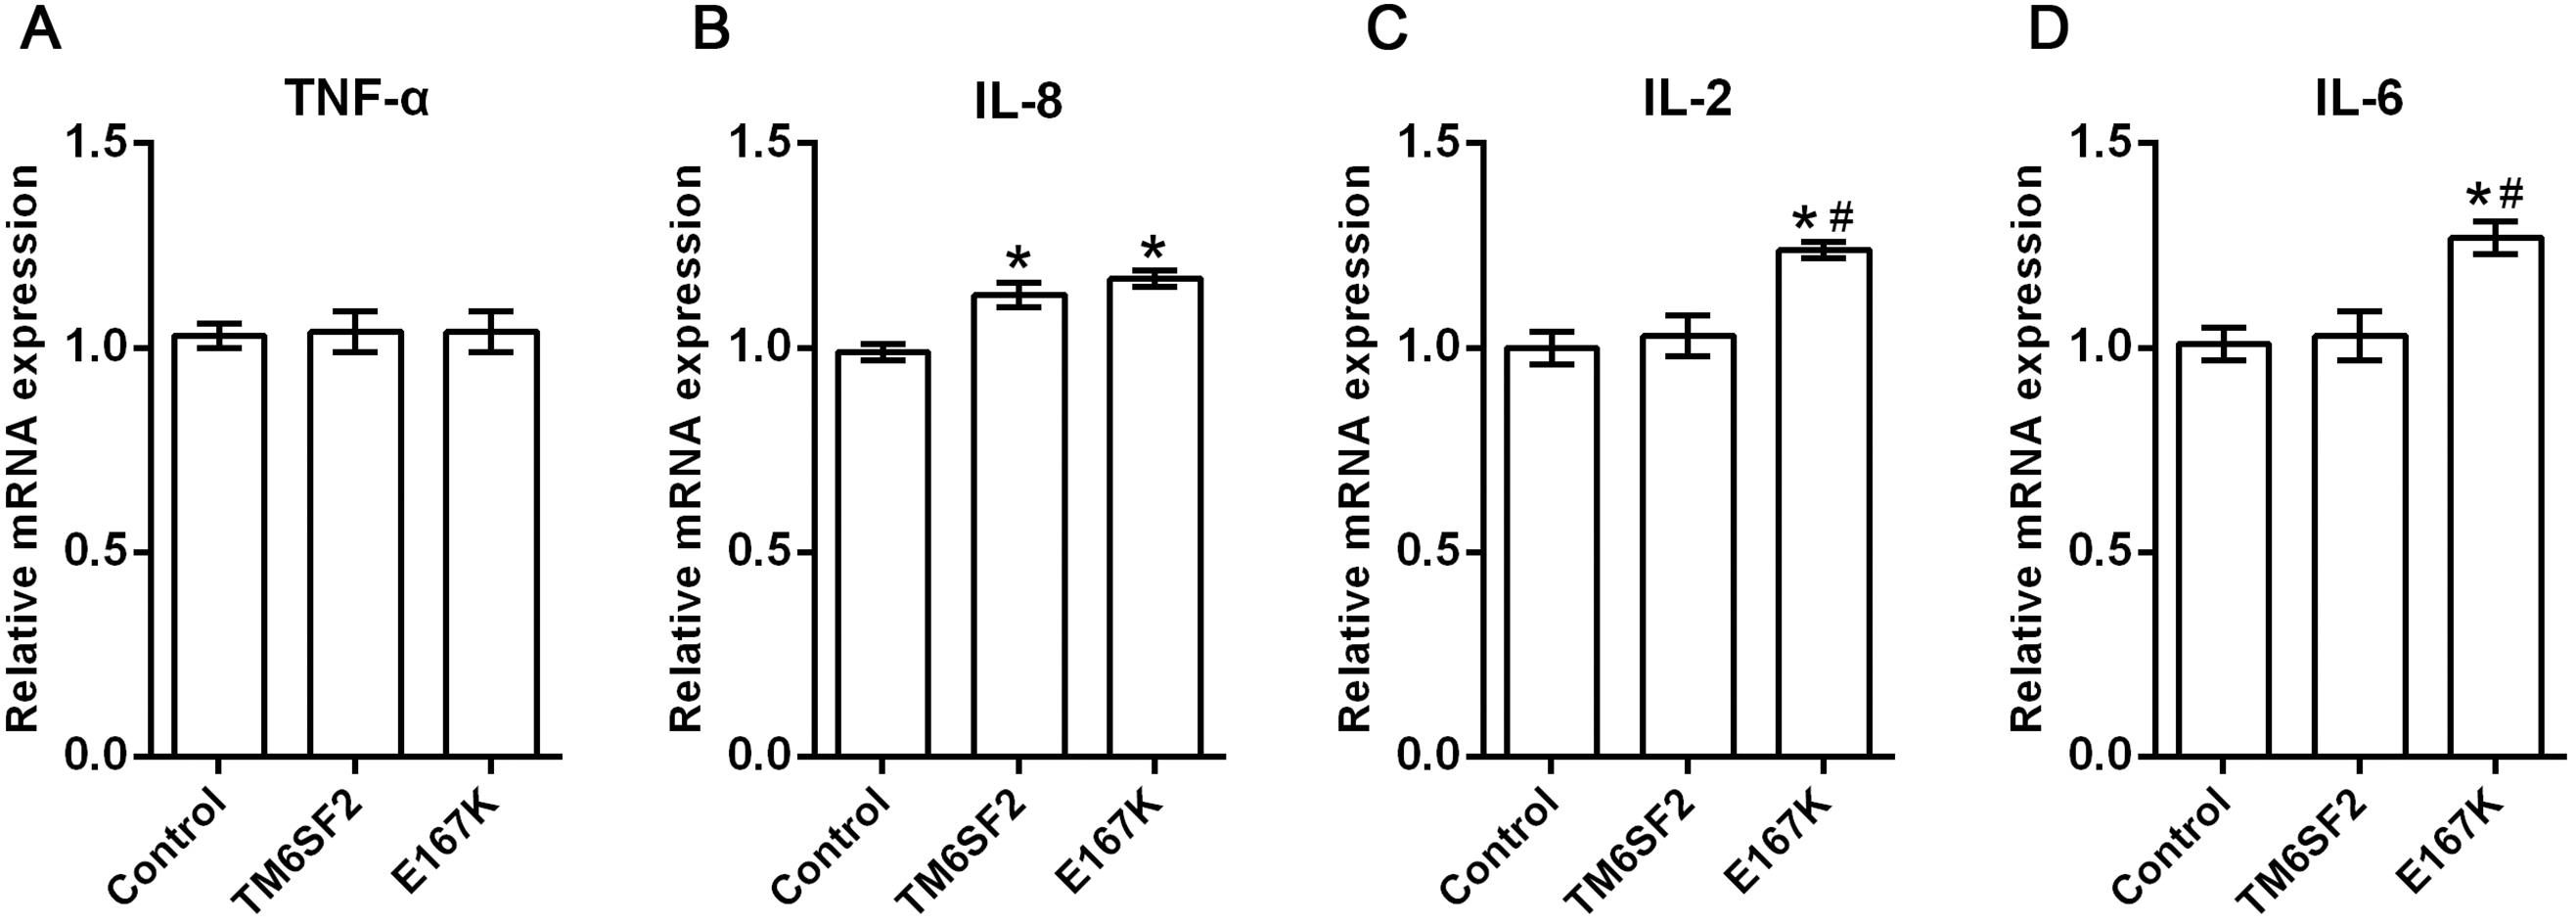 Relative expression levels of TNF-α, IL-2, IL-6 and IL-8 in HEPA 1-6 cells for the TM6SF2 overexpressed group, TM6SF2 E167K overexpressed group, and negative control group.